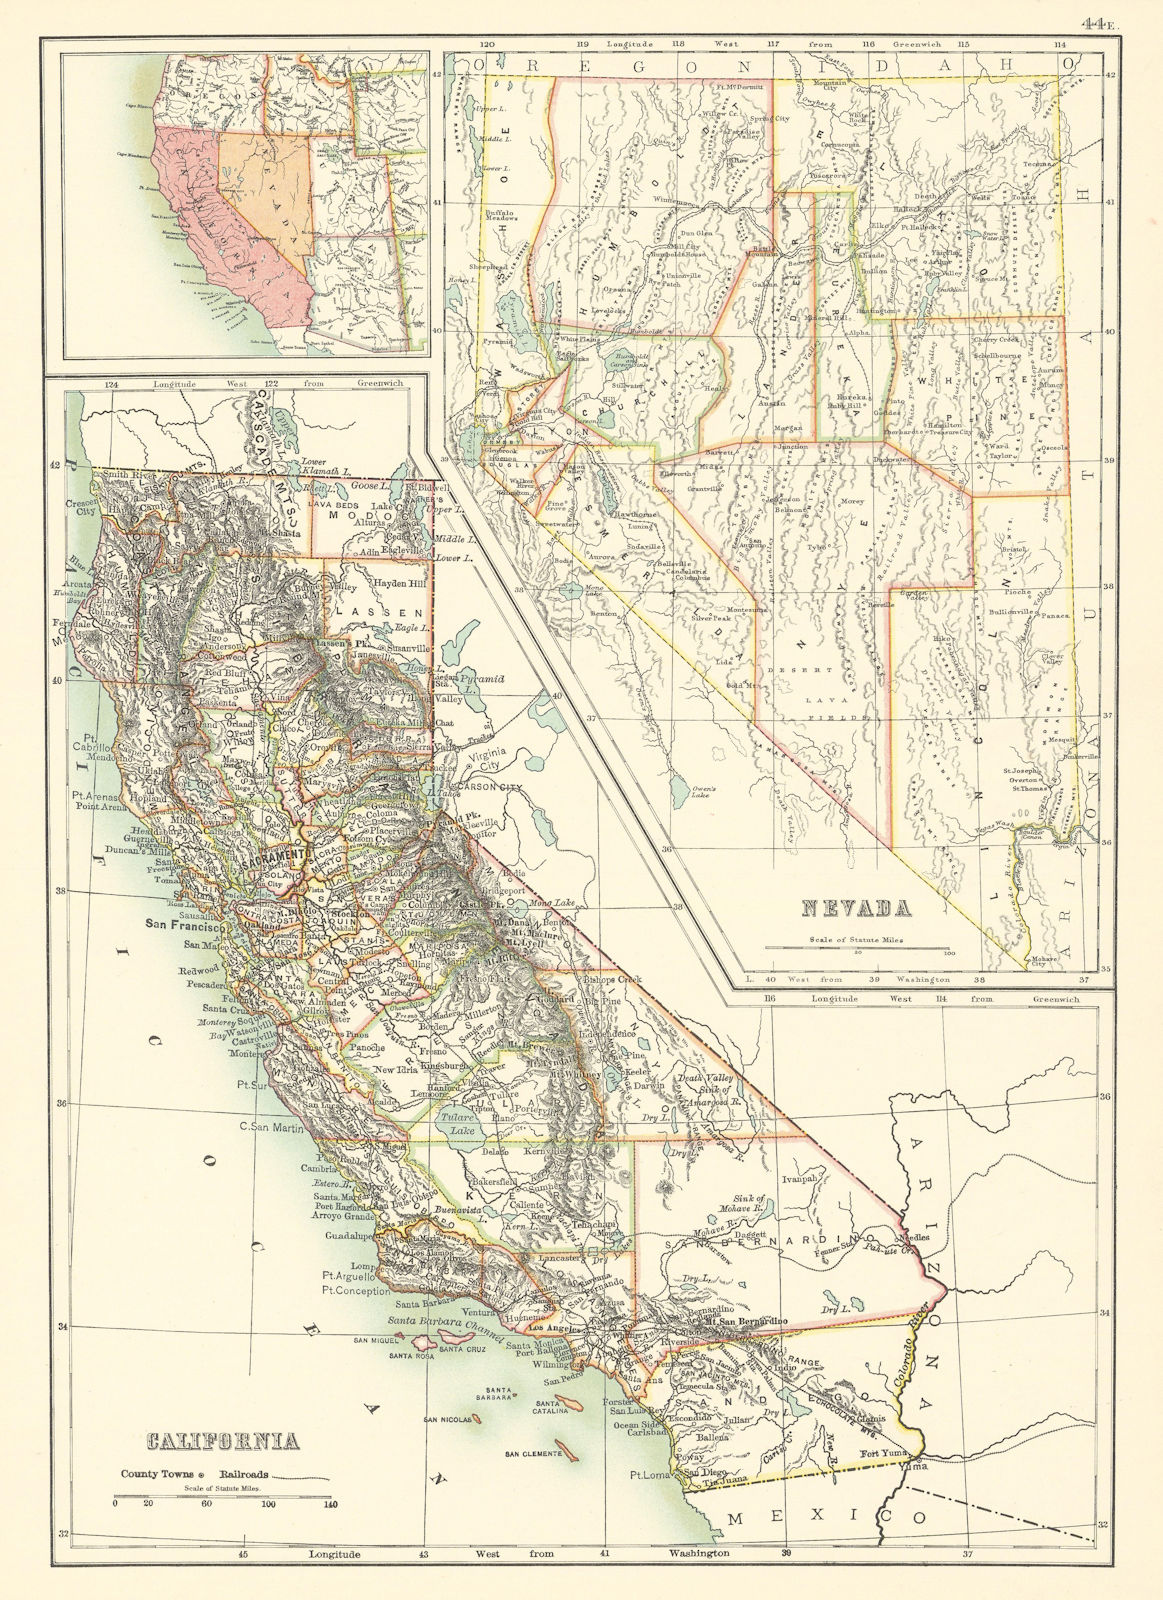 California and Nevada state maps showing counties. BARTHOLOMEW 1898 old